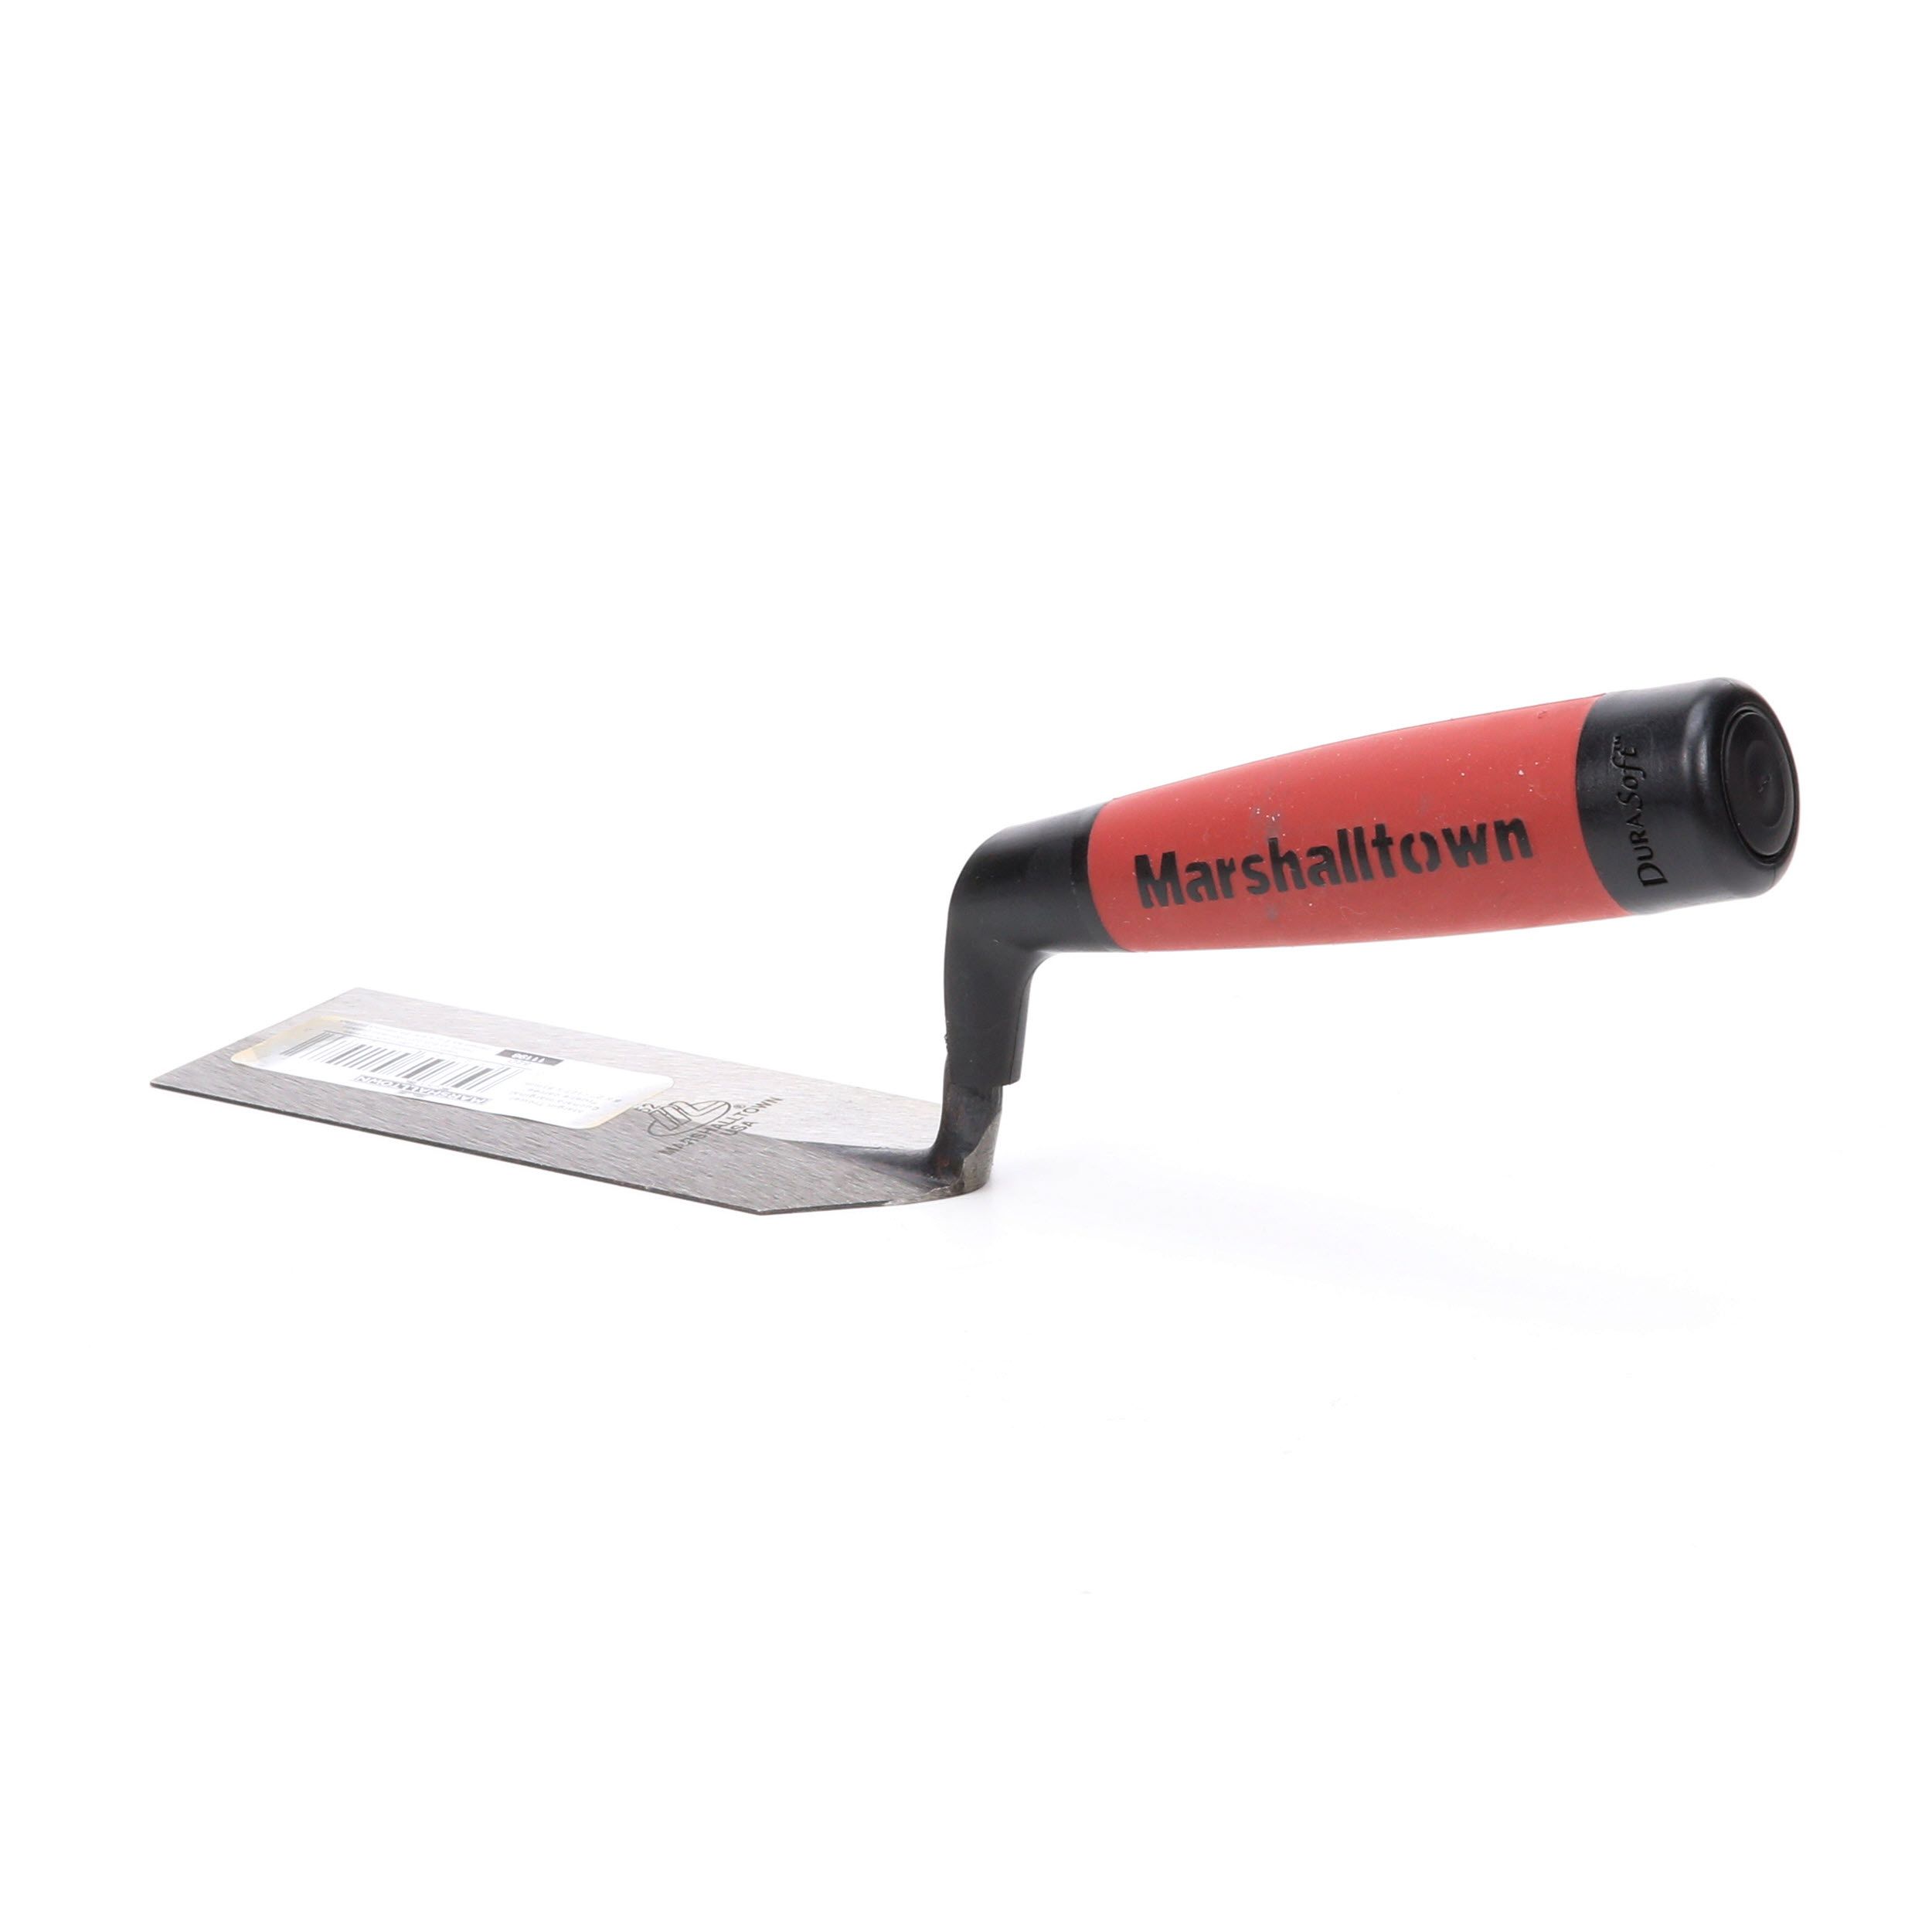 Marshall M52SND Marshalltown The Premier Line 52SND 5 2-Inch Square Notched Margin Trowel 